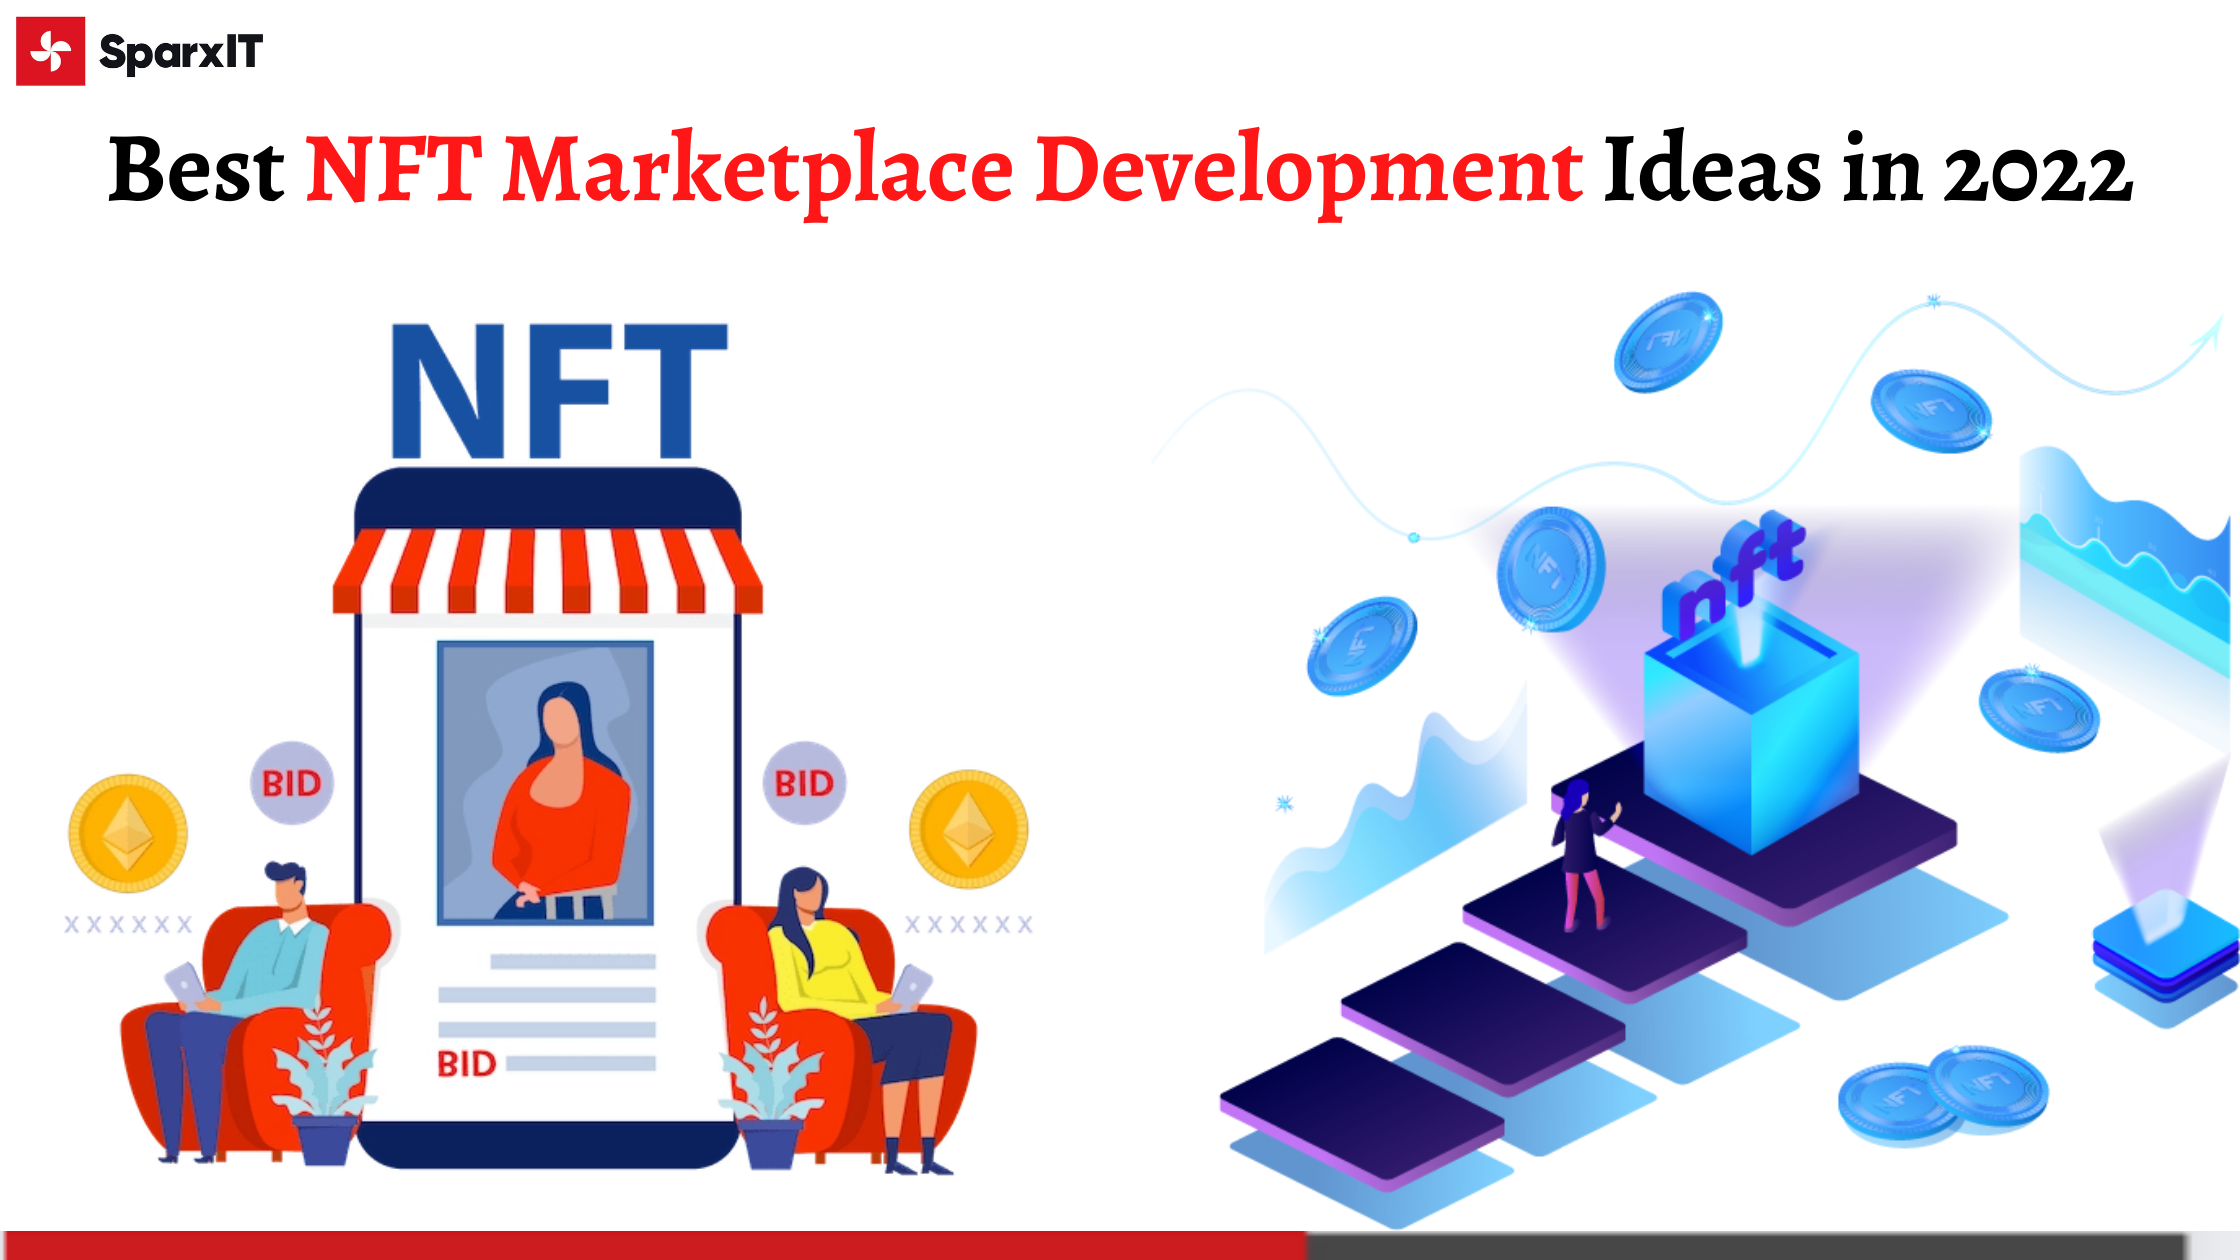 Top NFT Marketplace Ideas to Consider in 2022